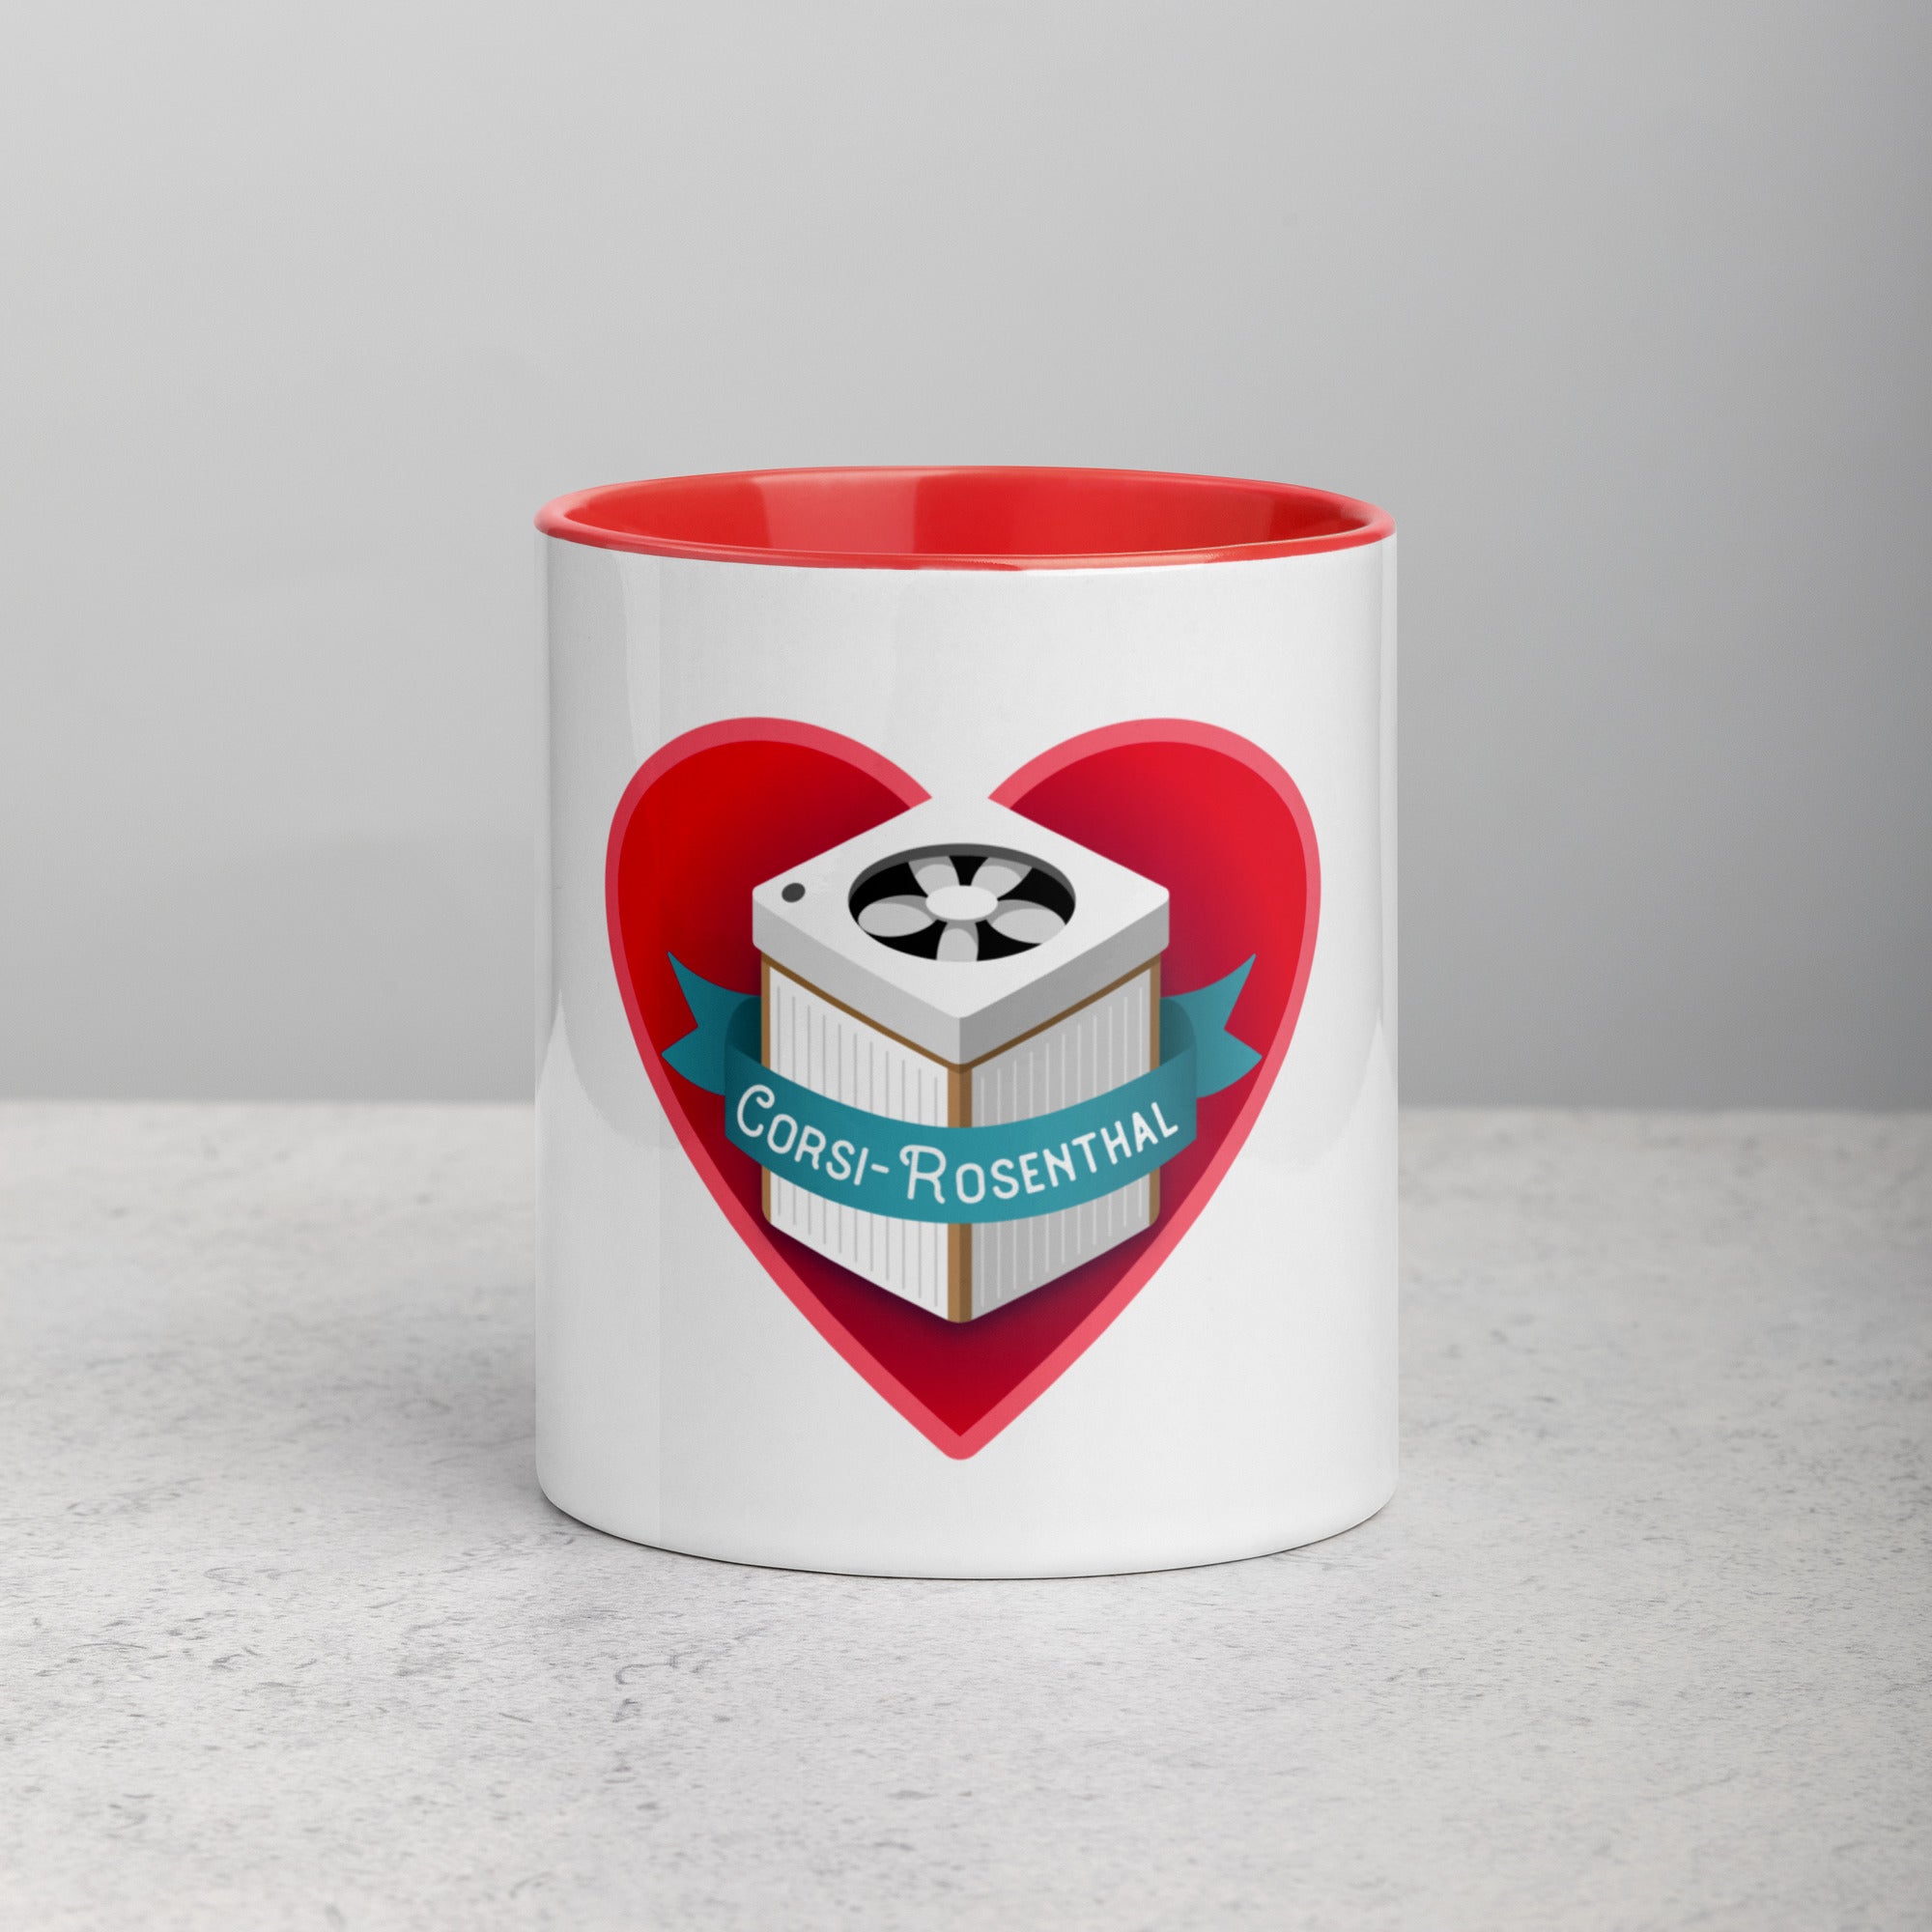 front facing white mug with red interior and handle. Mug has red love heart image with an image of a Corsi Rosenthal box with text in a blue ribbon